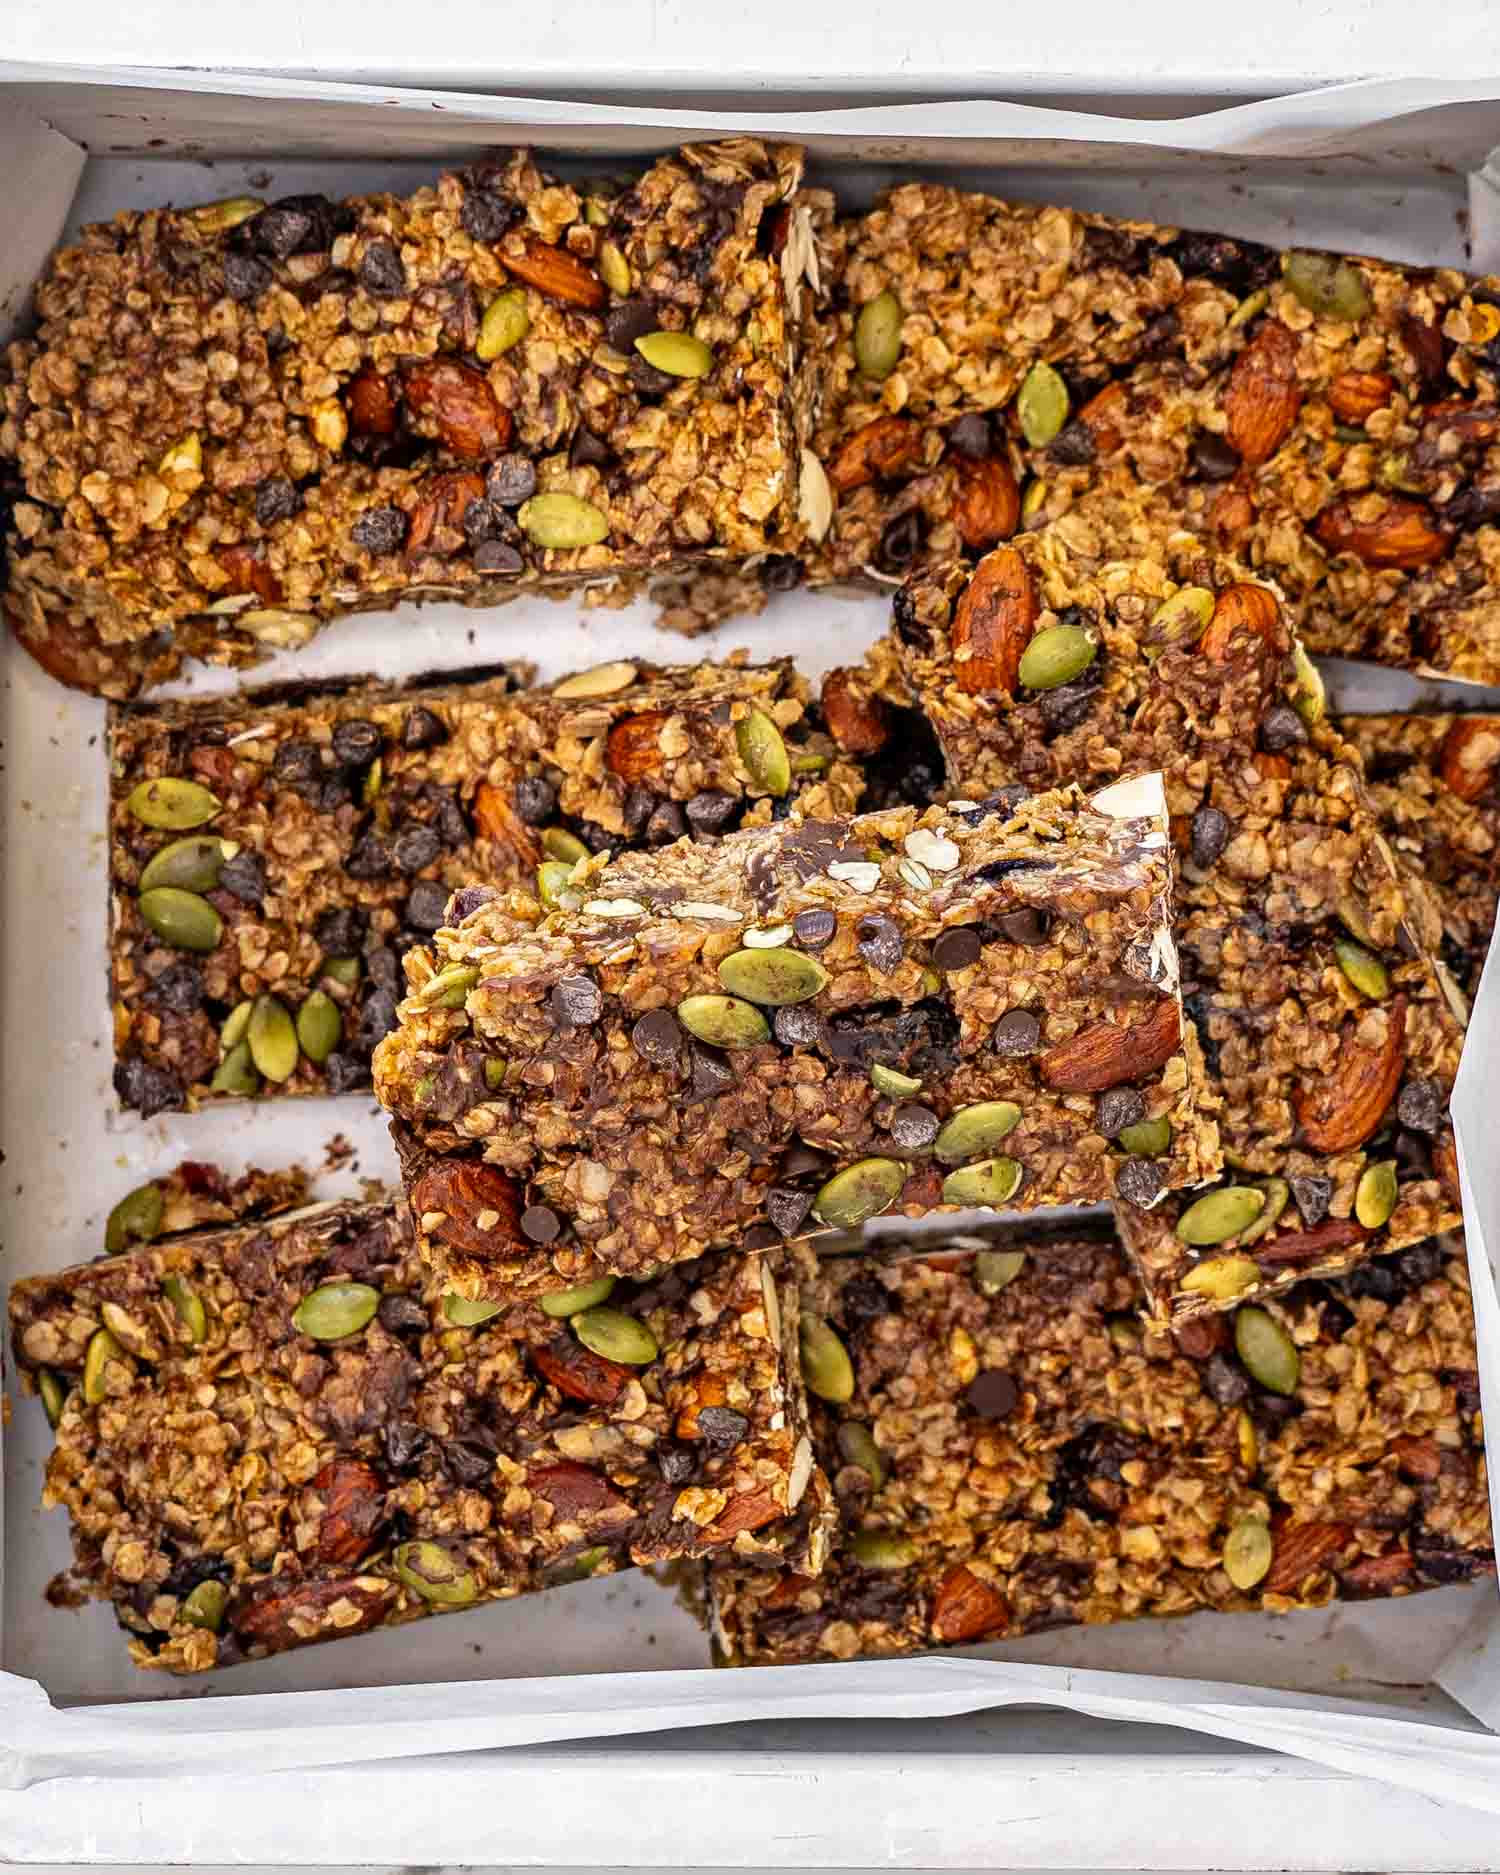 freshly made granola bars all cut up in a square baking dish.